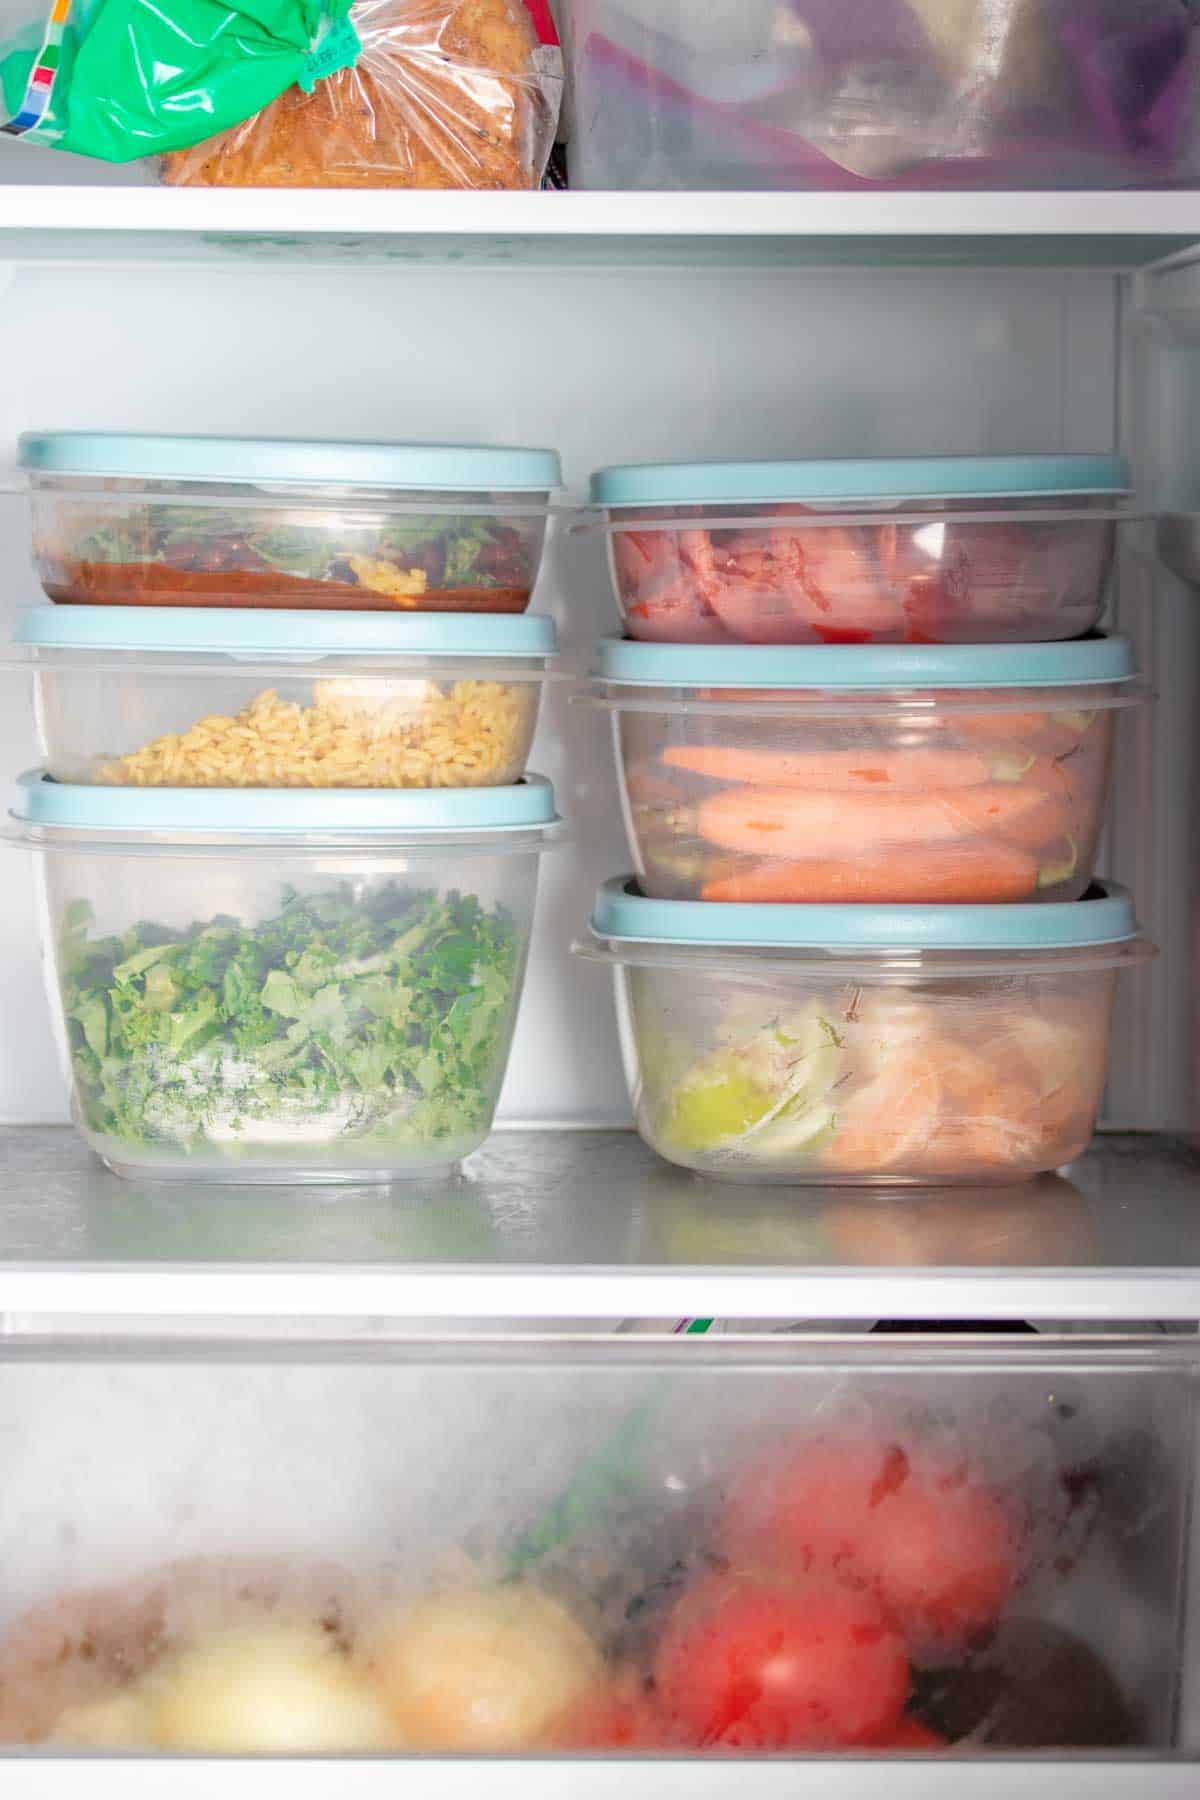 Two stacks of three containers on a shelf in the refrigerator.